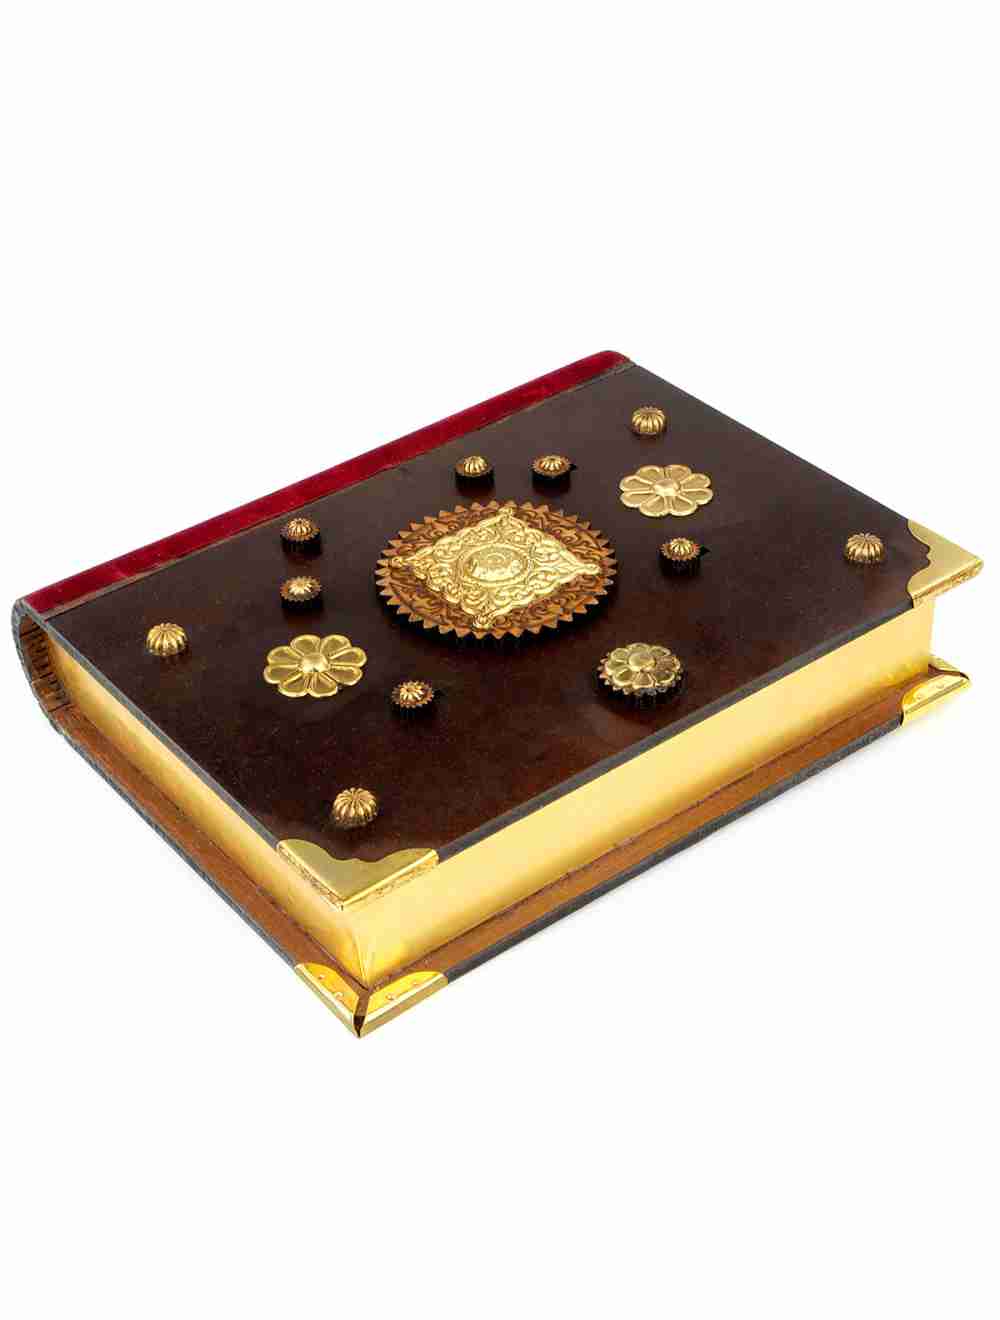 The noble book wooden trick box